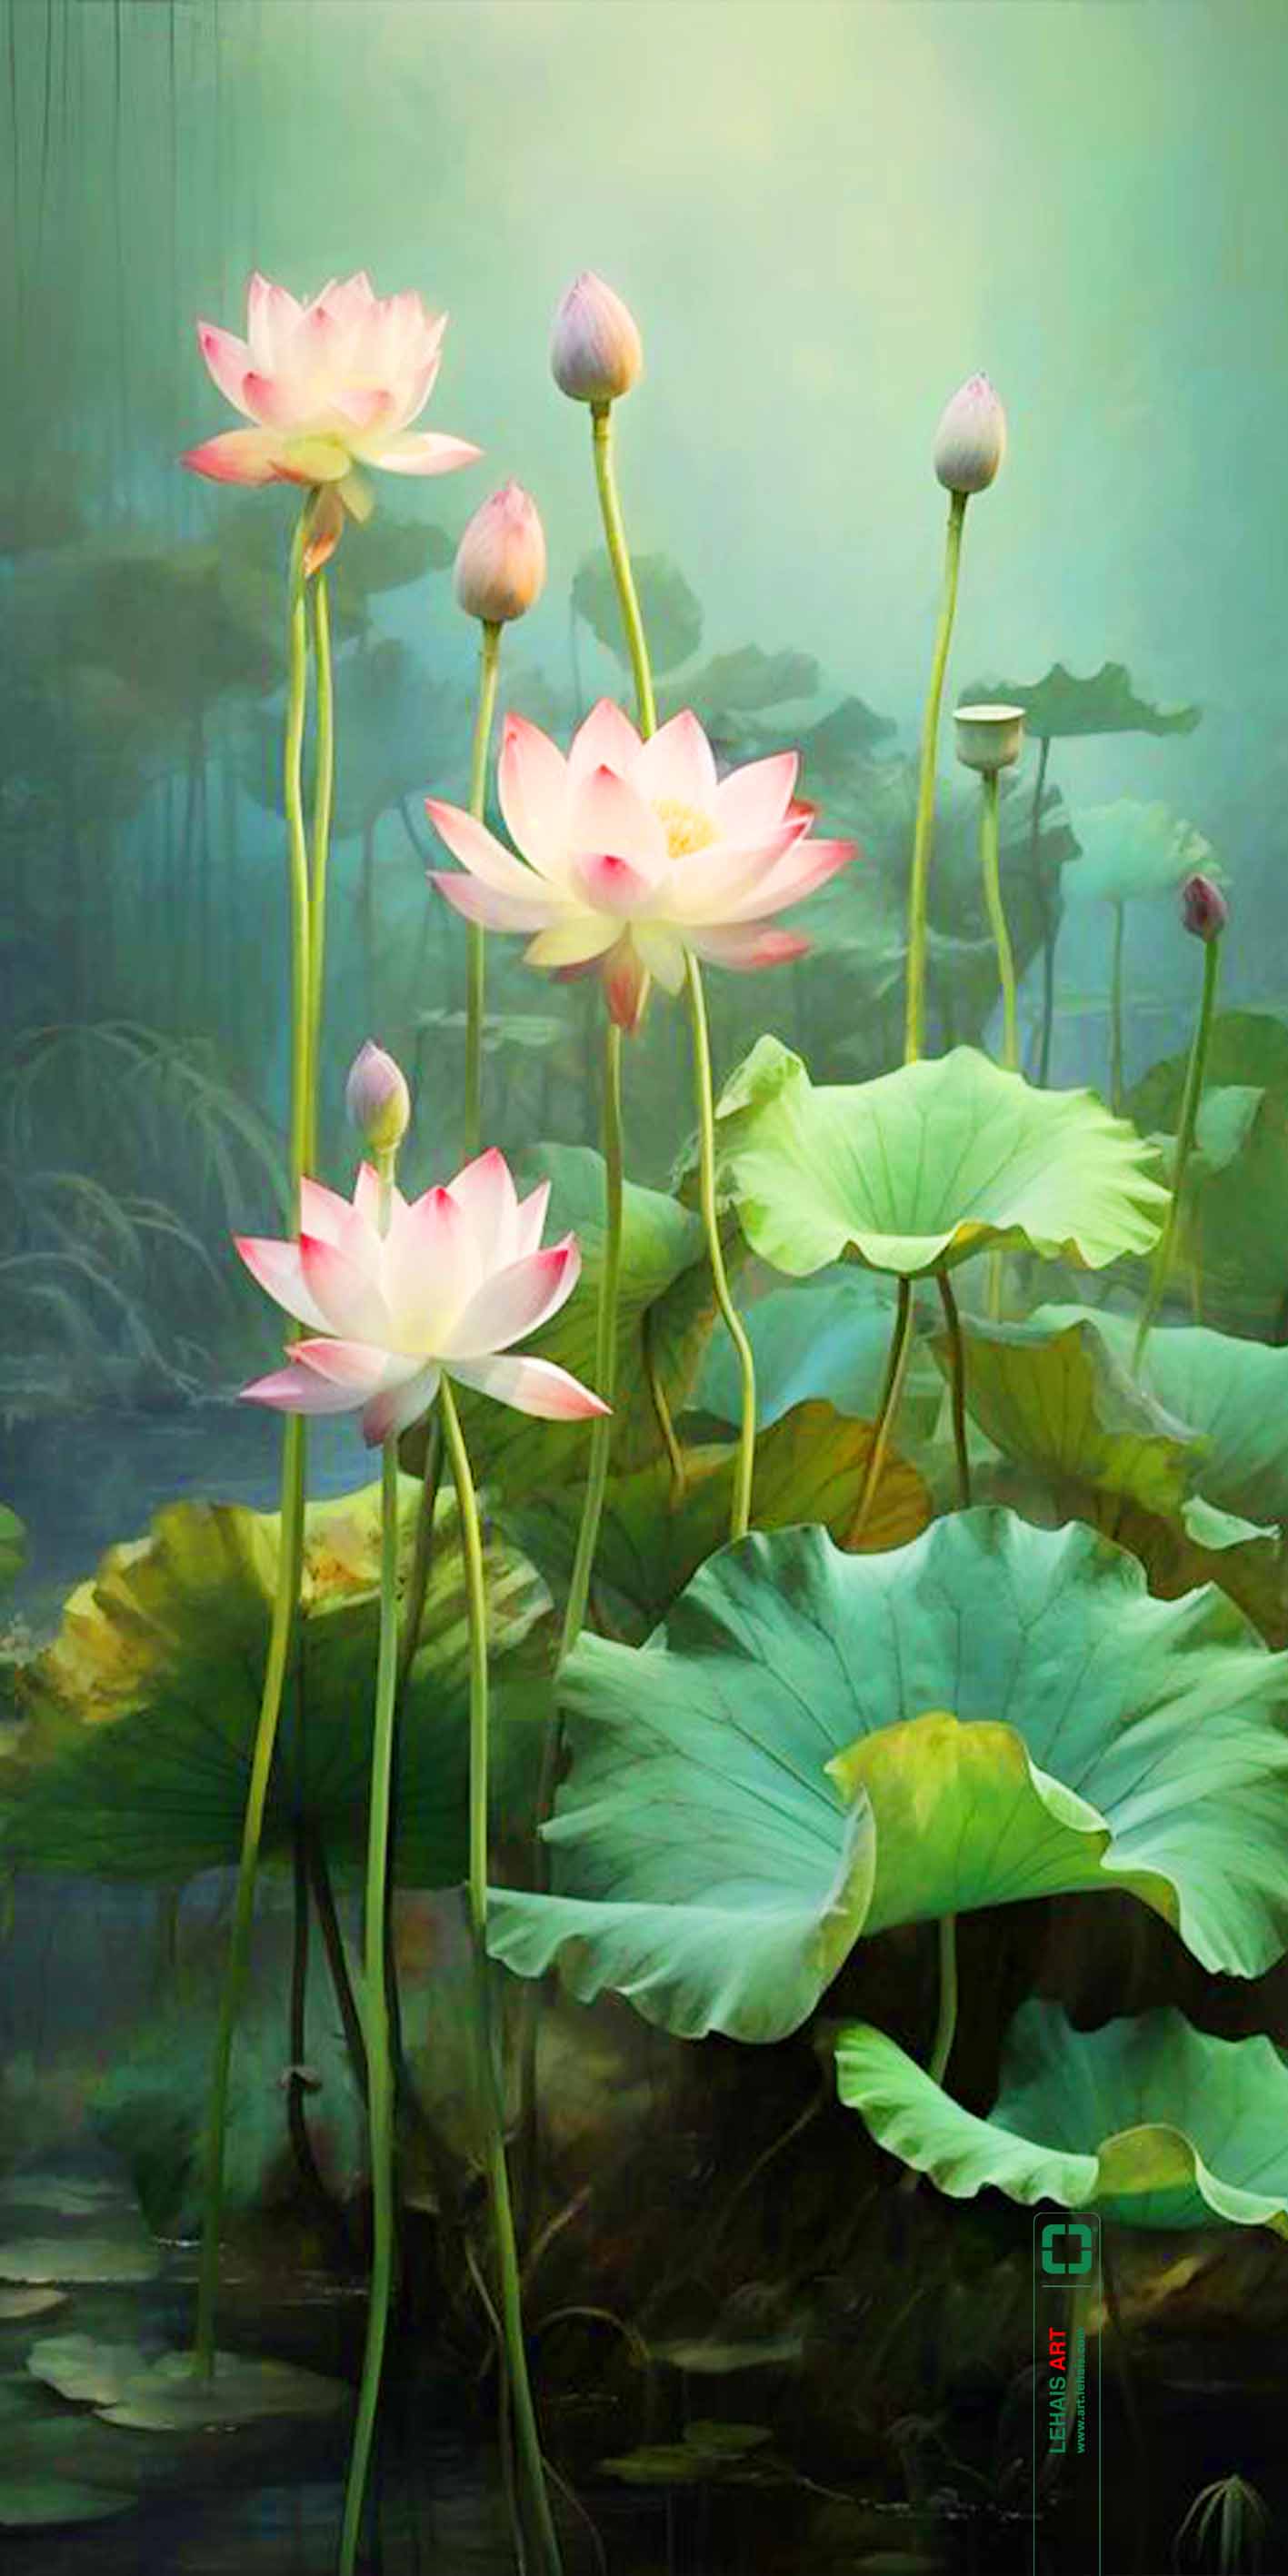 Oil painting depicting realistic lotus flowers in Modern style - TSD760LHAR